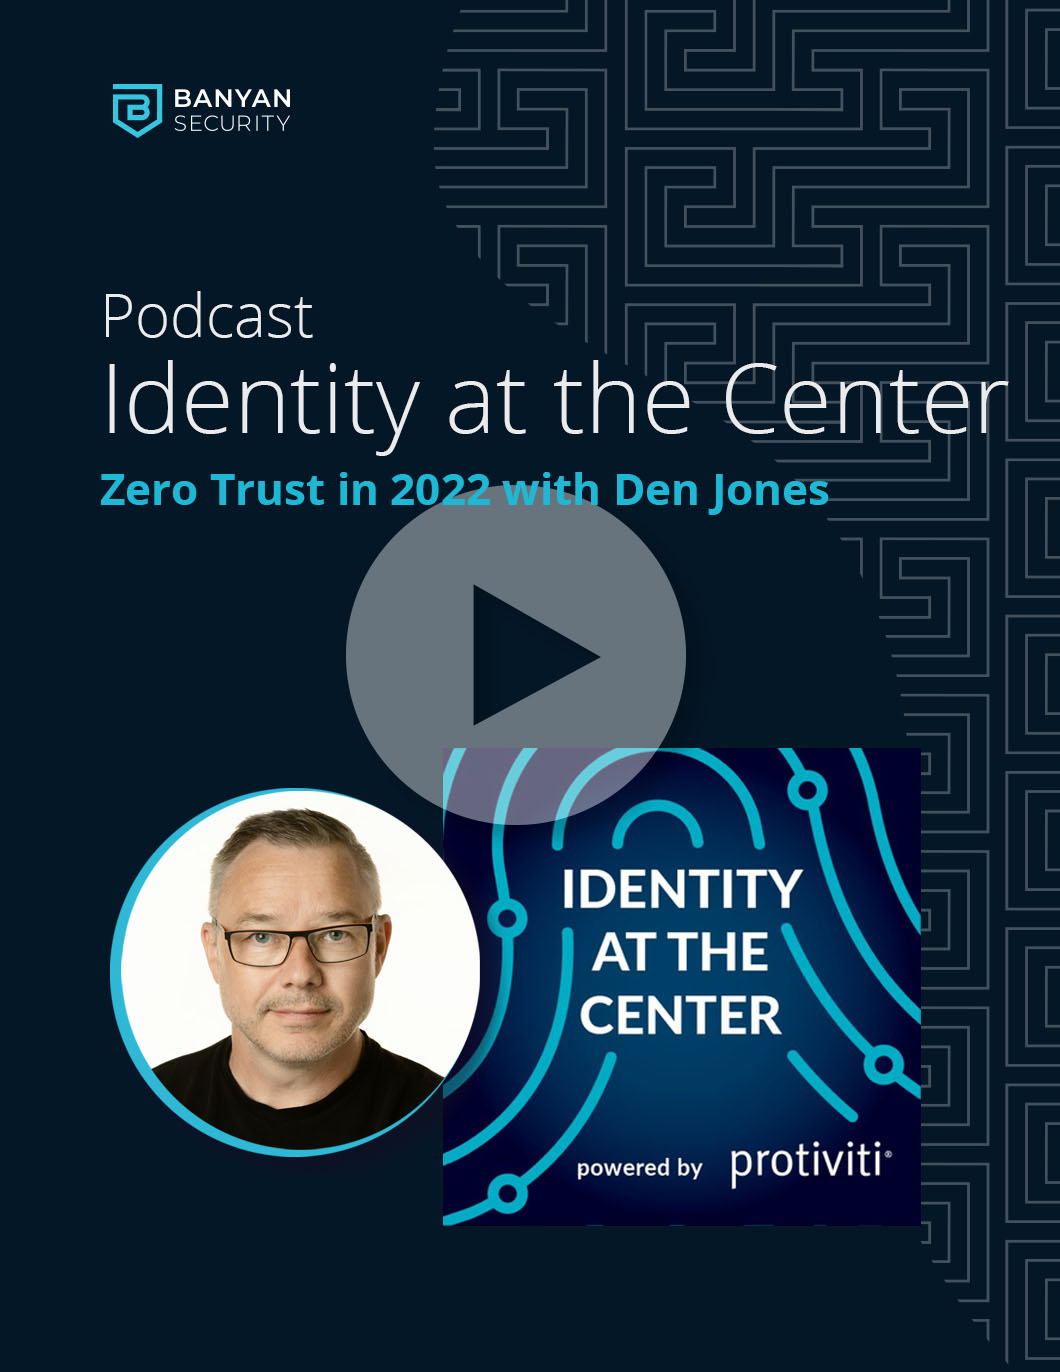 Identity at the Center podcast thumbnail